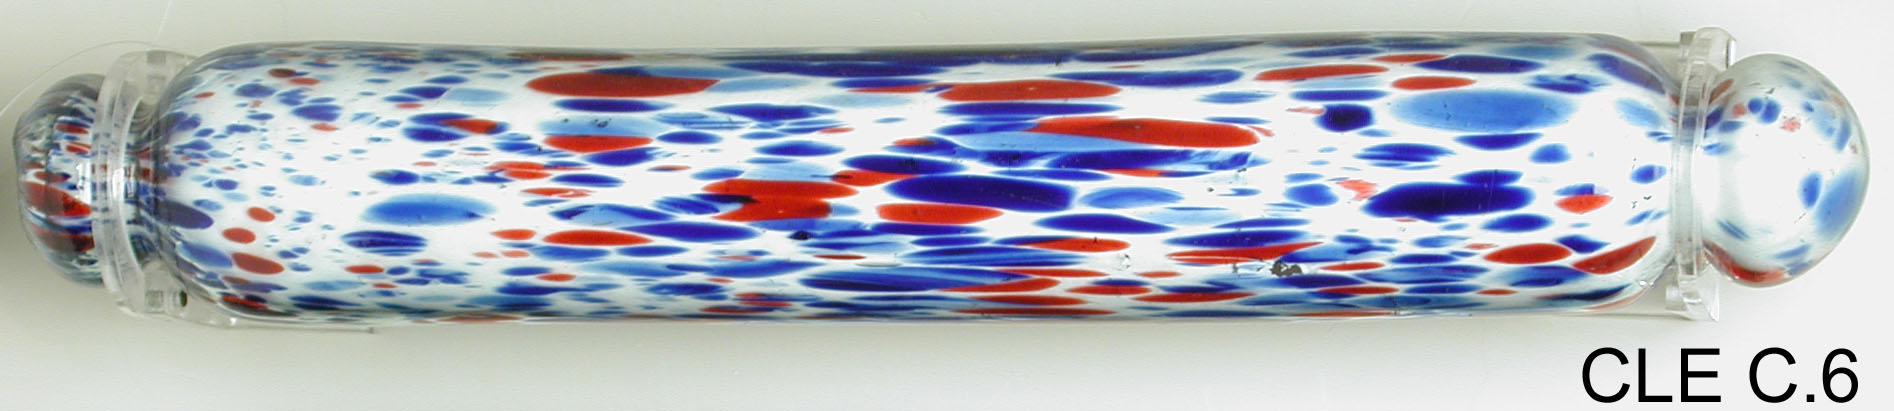 Glass rolling pin flecked with blue and red.